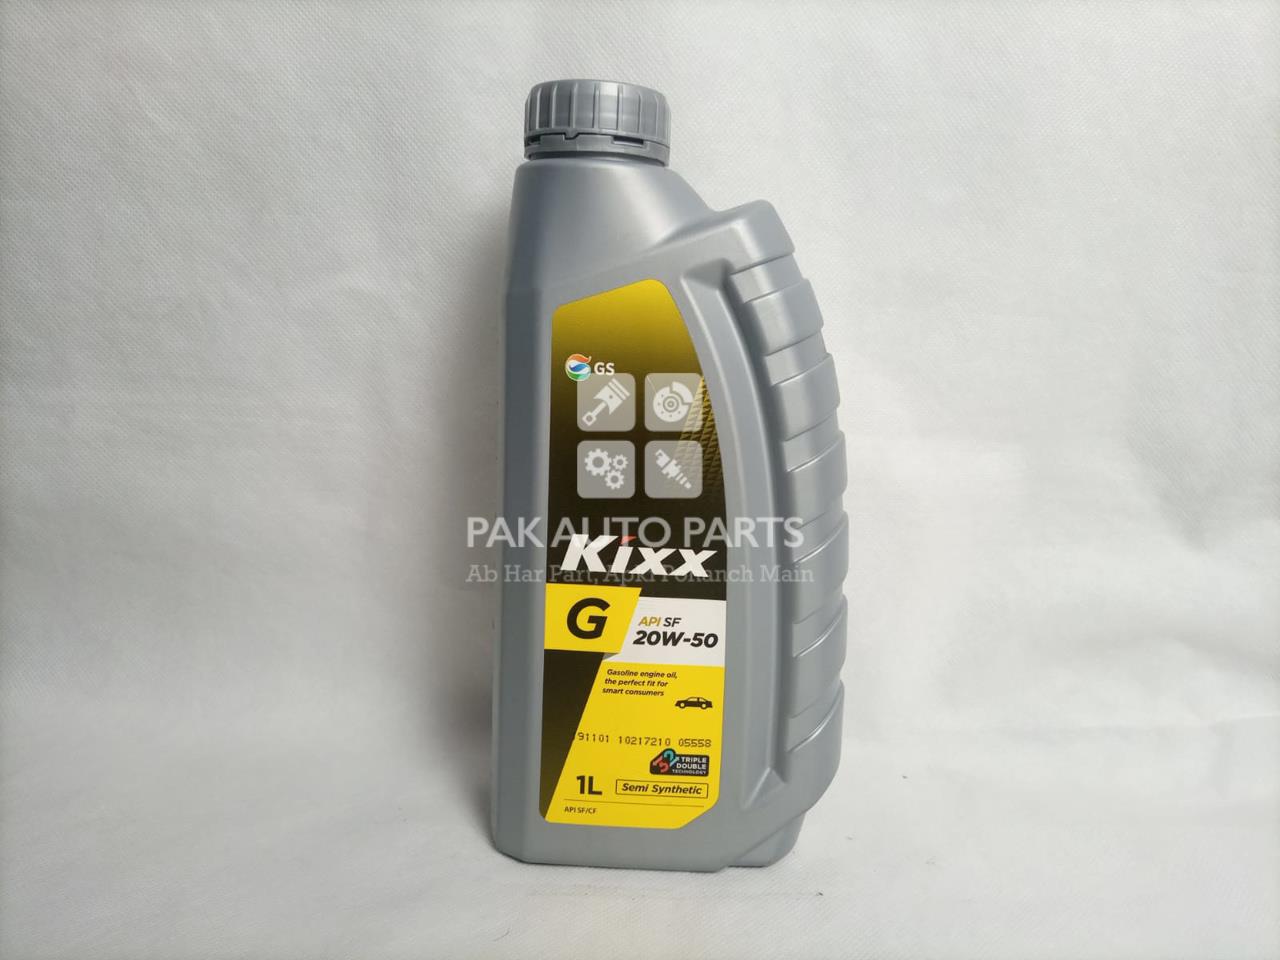 Picture of Kixx G API SF 20W-50 (1L) Gasoline engine oil, the perfect fit for smart consumers